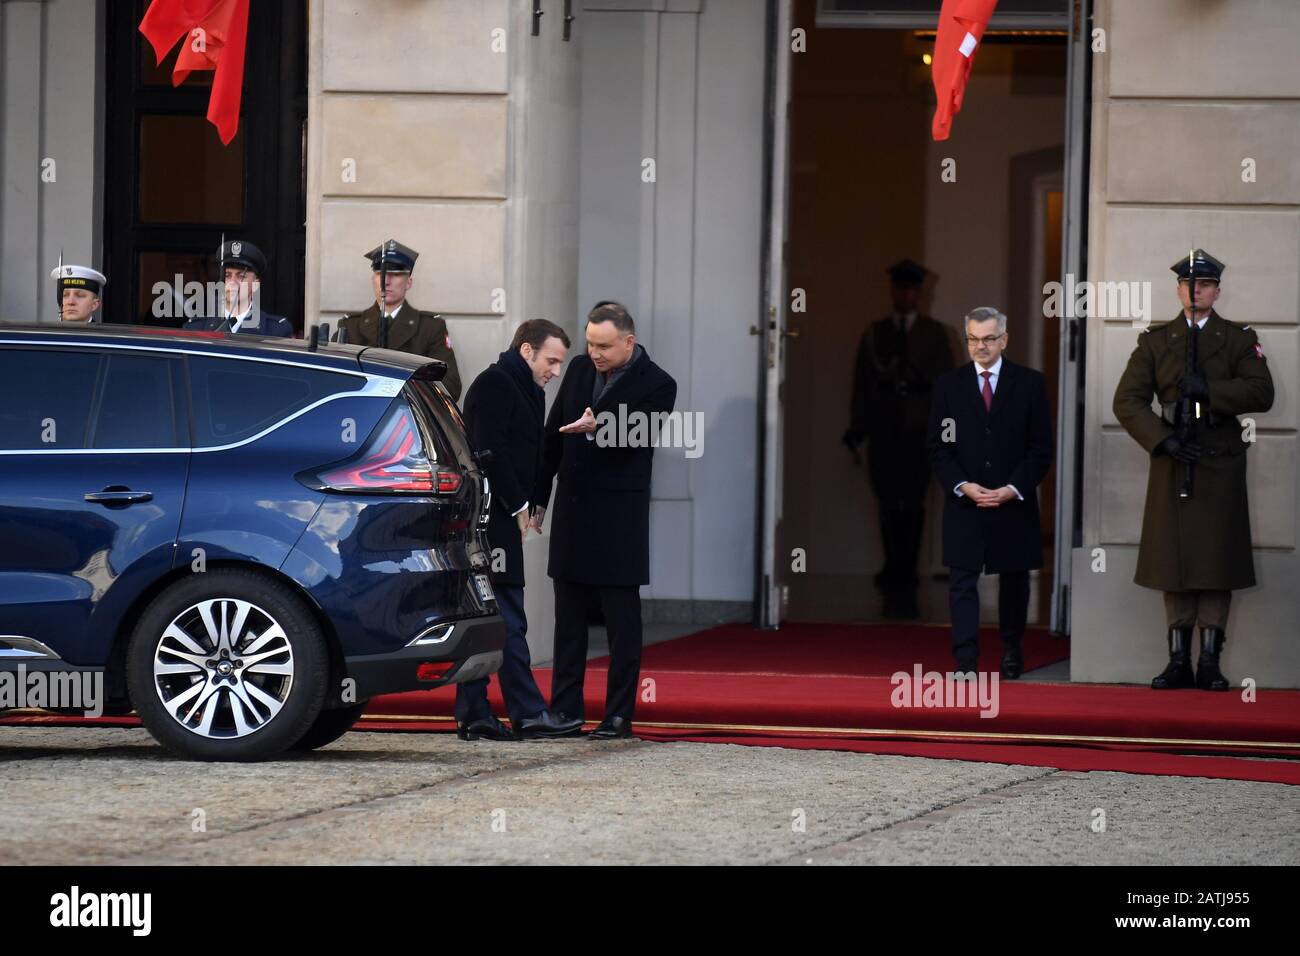 Warsaw, Poland. 3rd February, 2020. President of France Republic Emmanuel Macron visits president of Poland Andrzej Duda in Presidential Palace Stock Photo